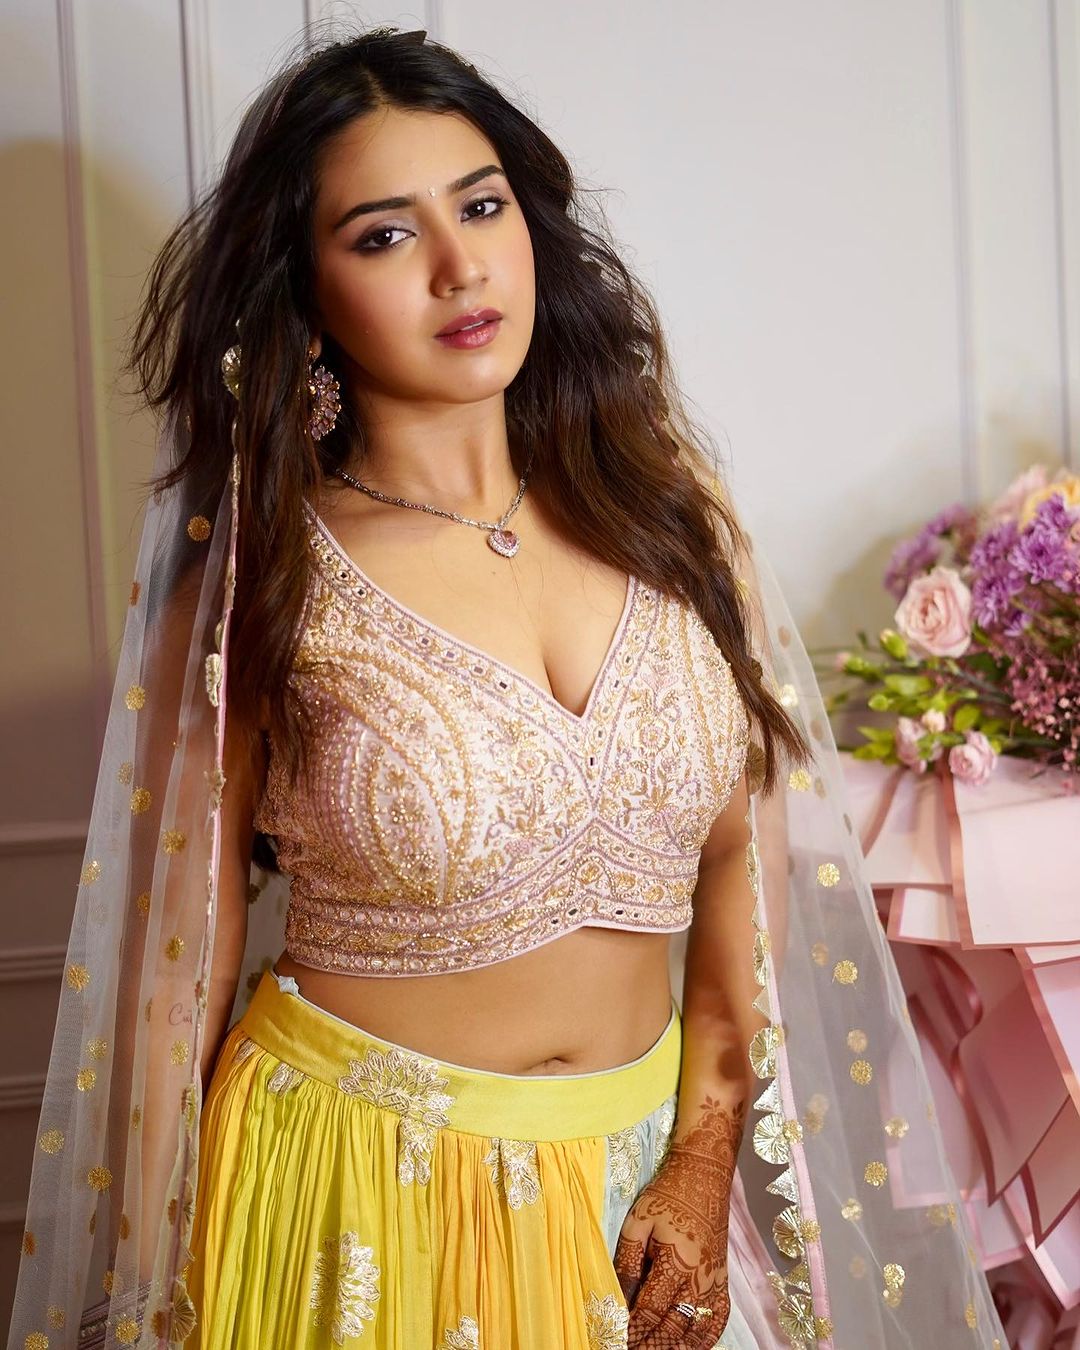 Roshni Walia – From Television Debut to Versatile Actress and Music Video Sensation